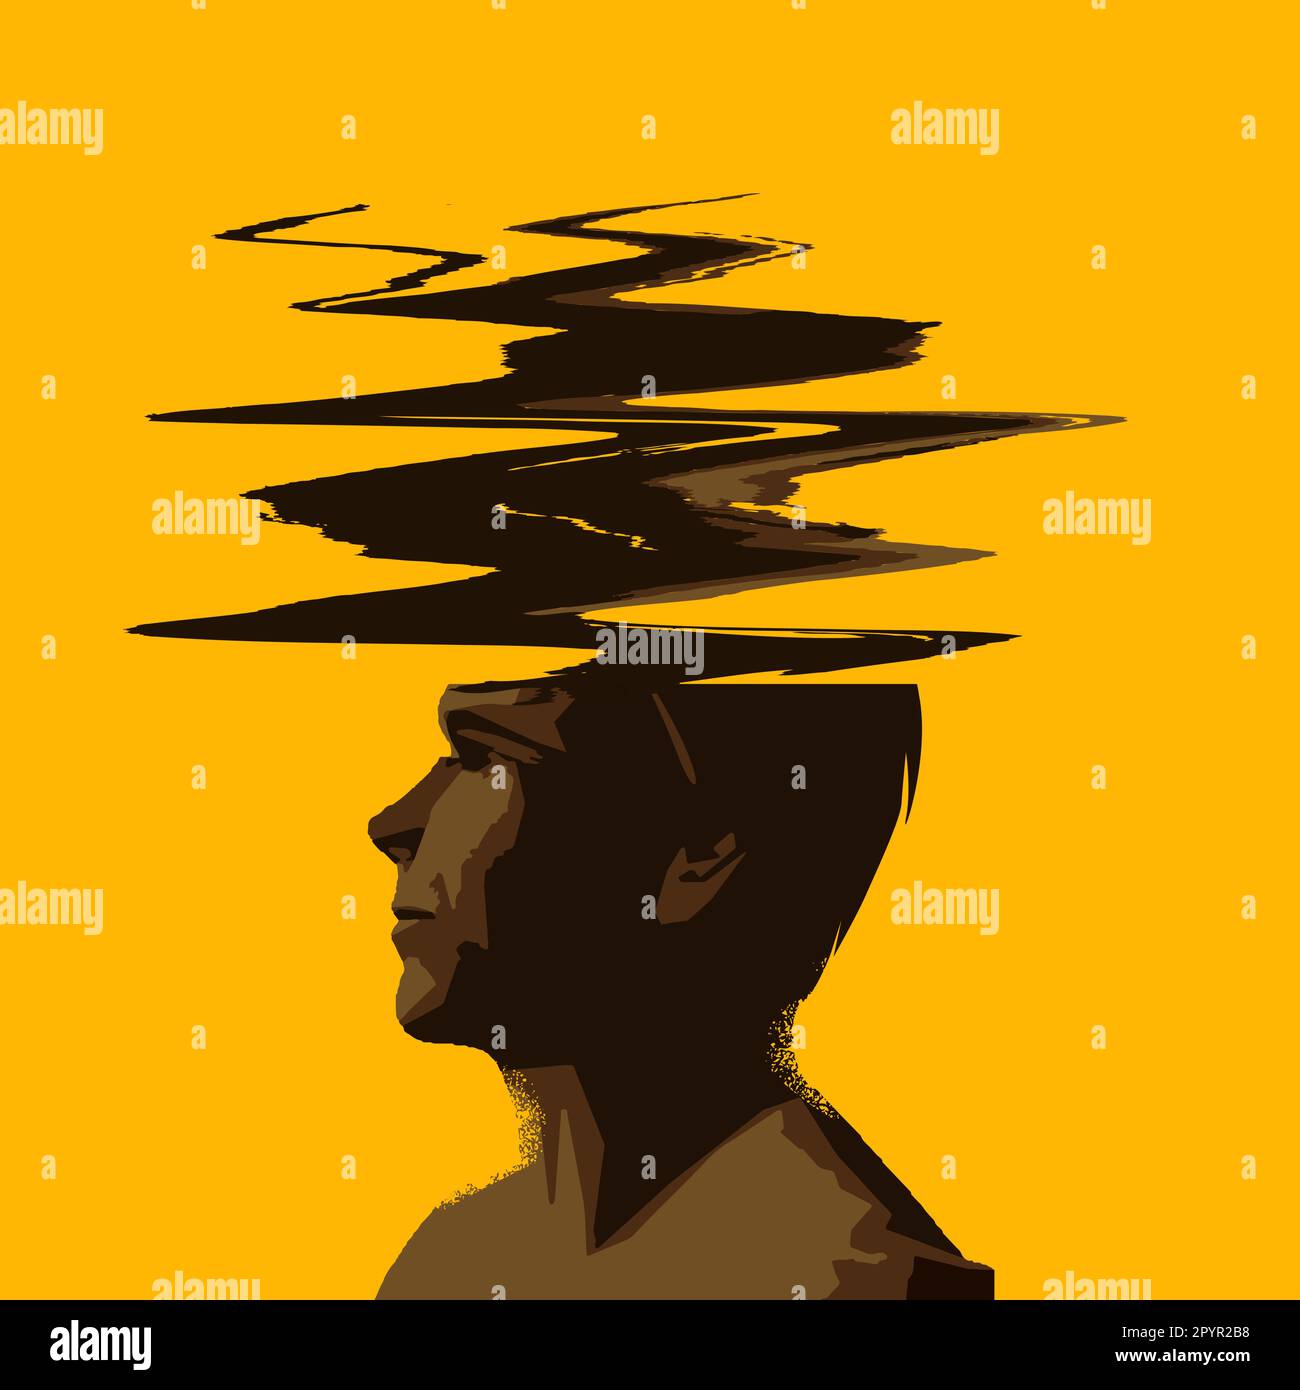 Mindfulness And Wellbeing Human Mind Concept. Waves of uncertainty and doubt. Vector illustration Stock Vector